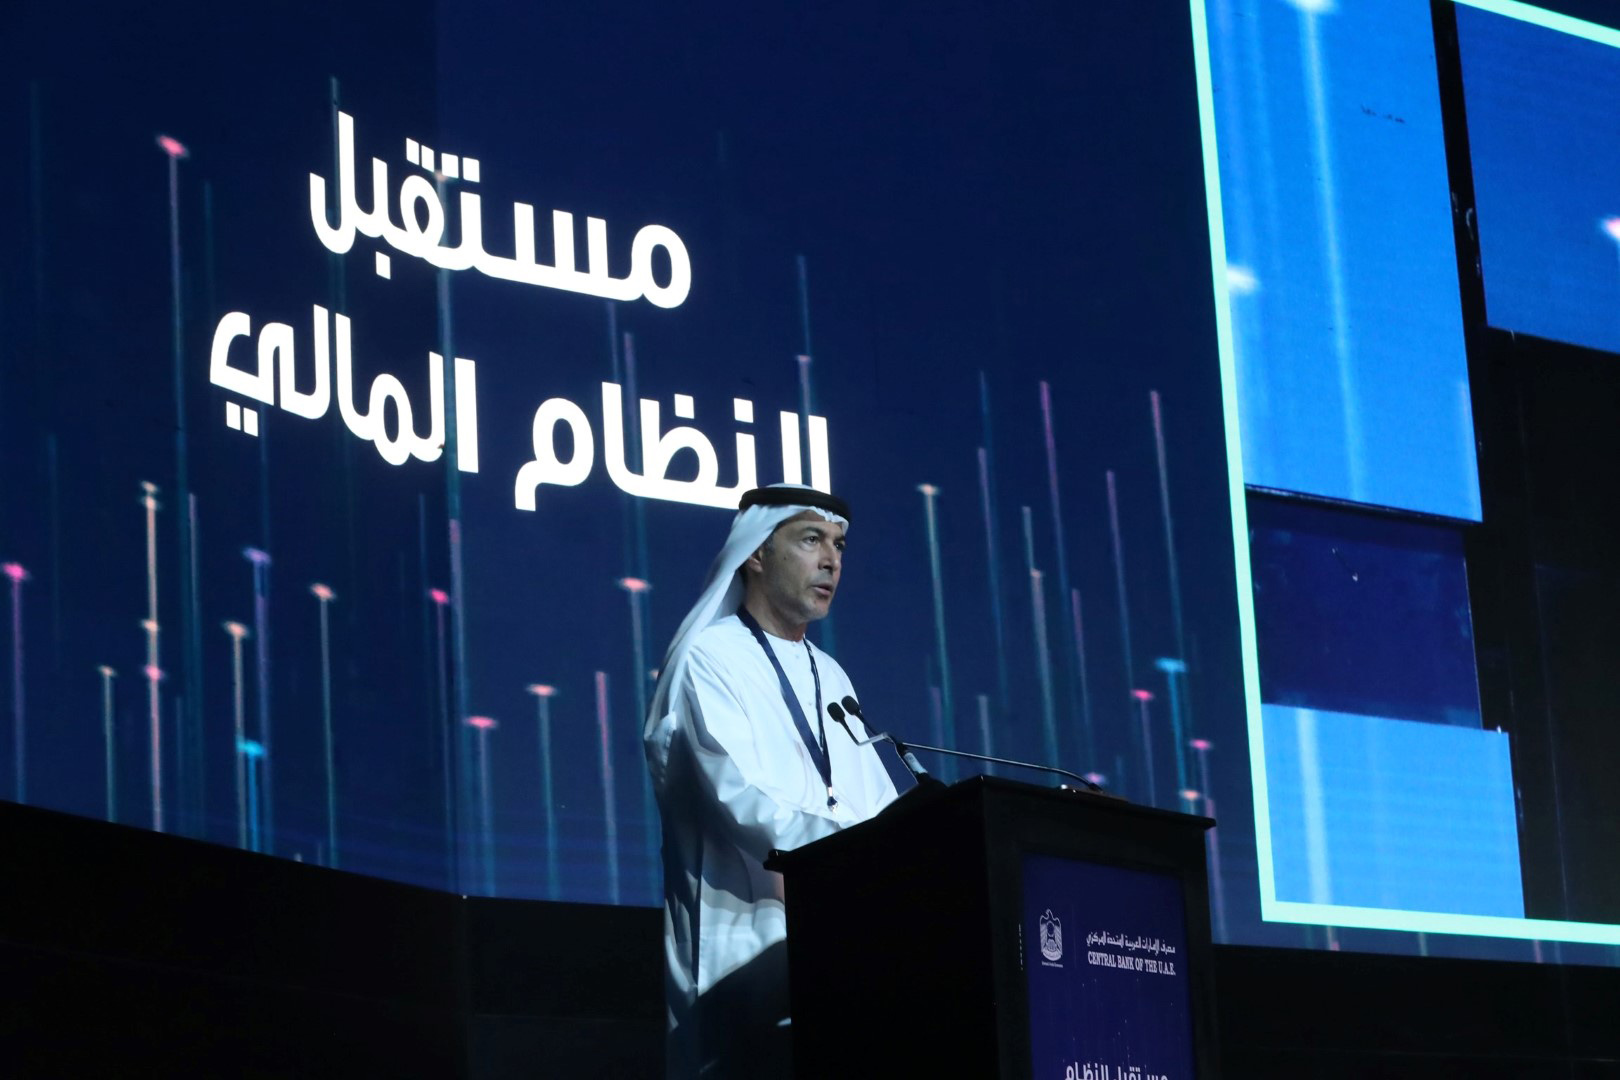 The Future Finance Conference outlines the value proposition of Islamic